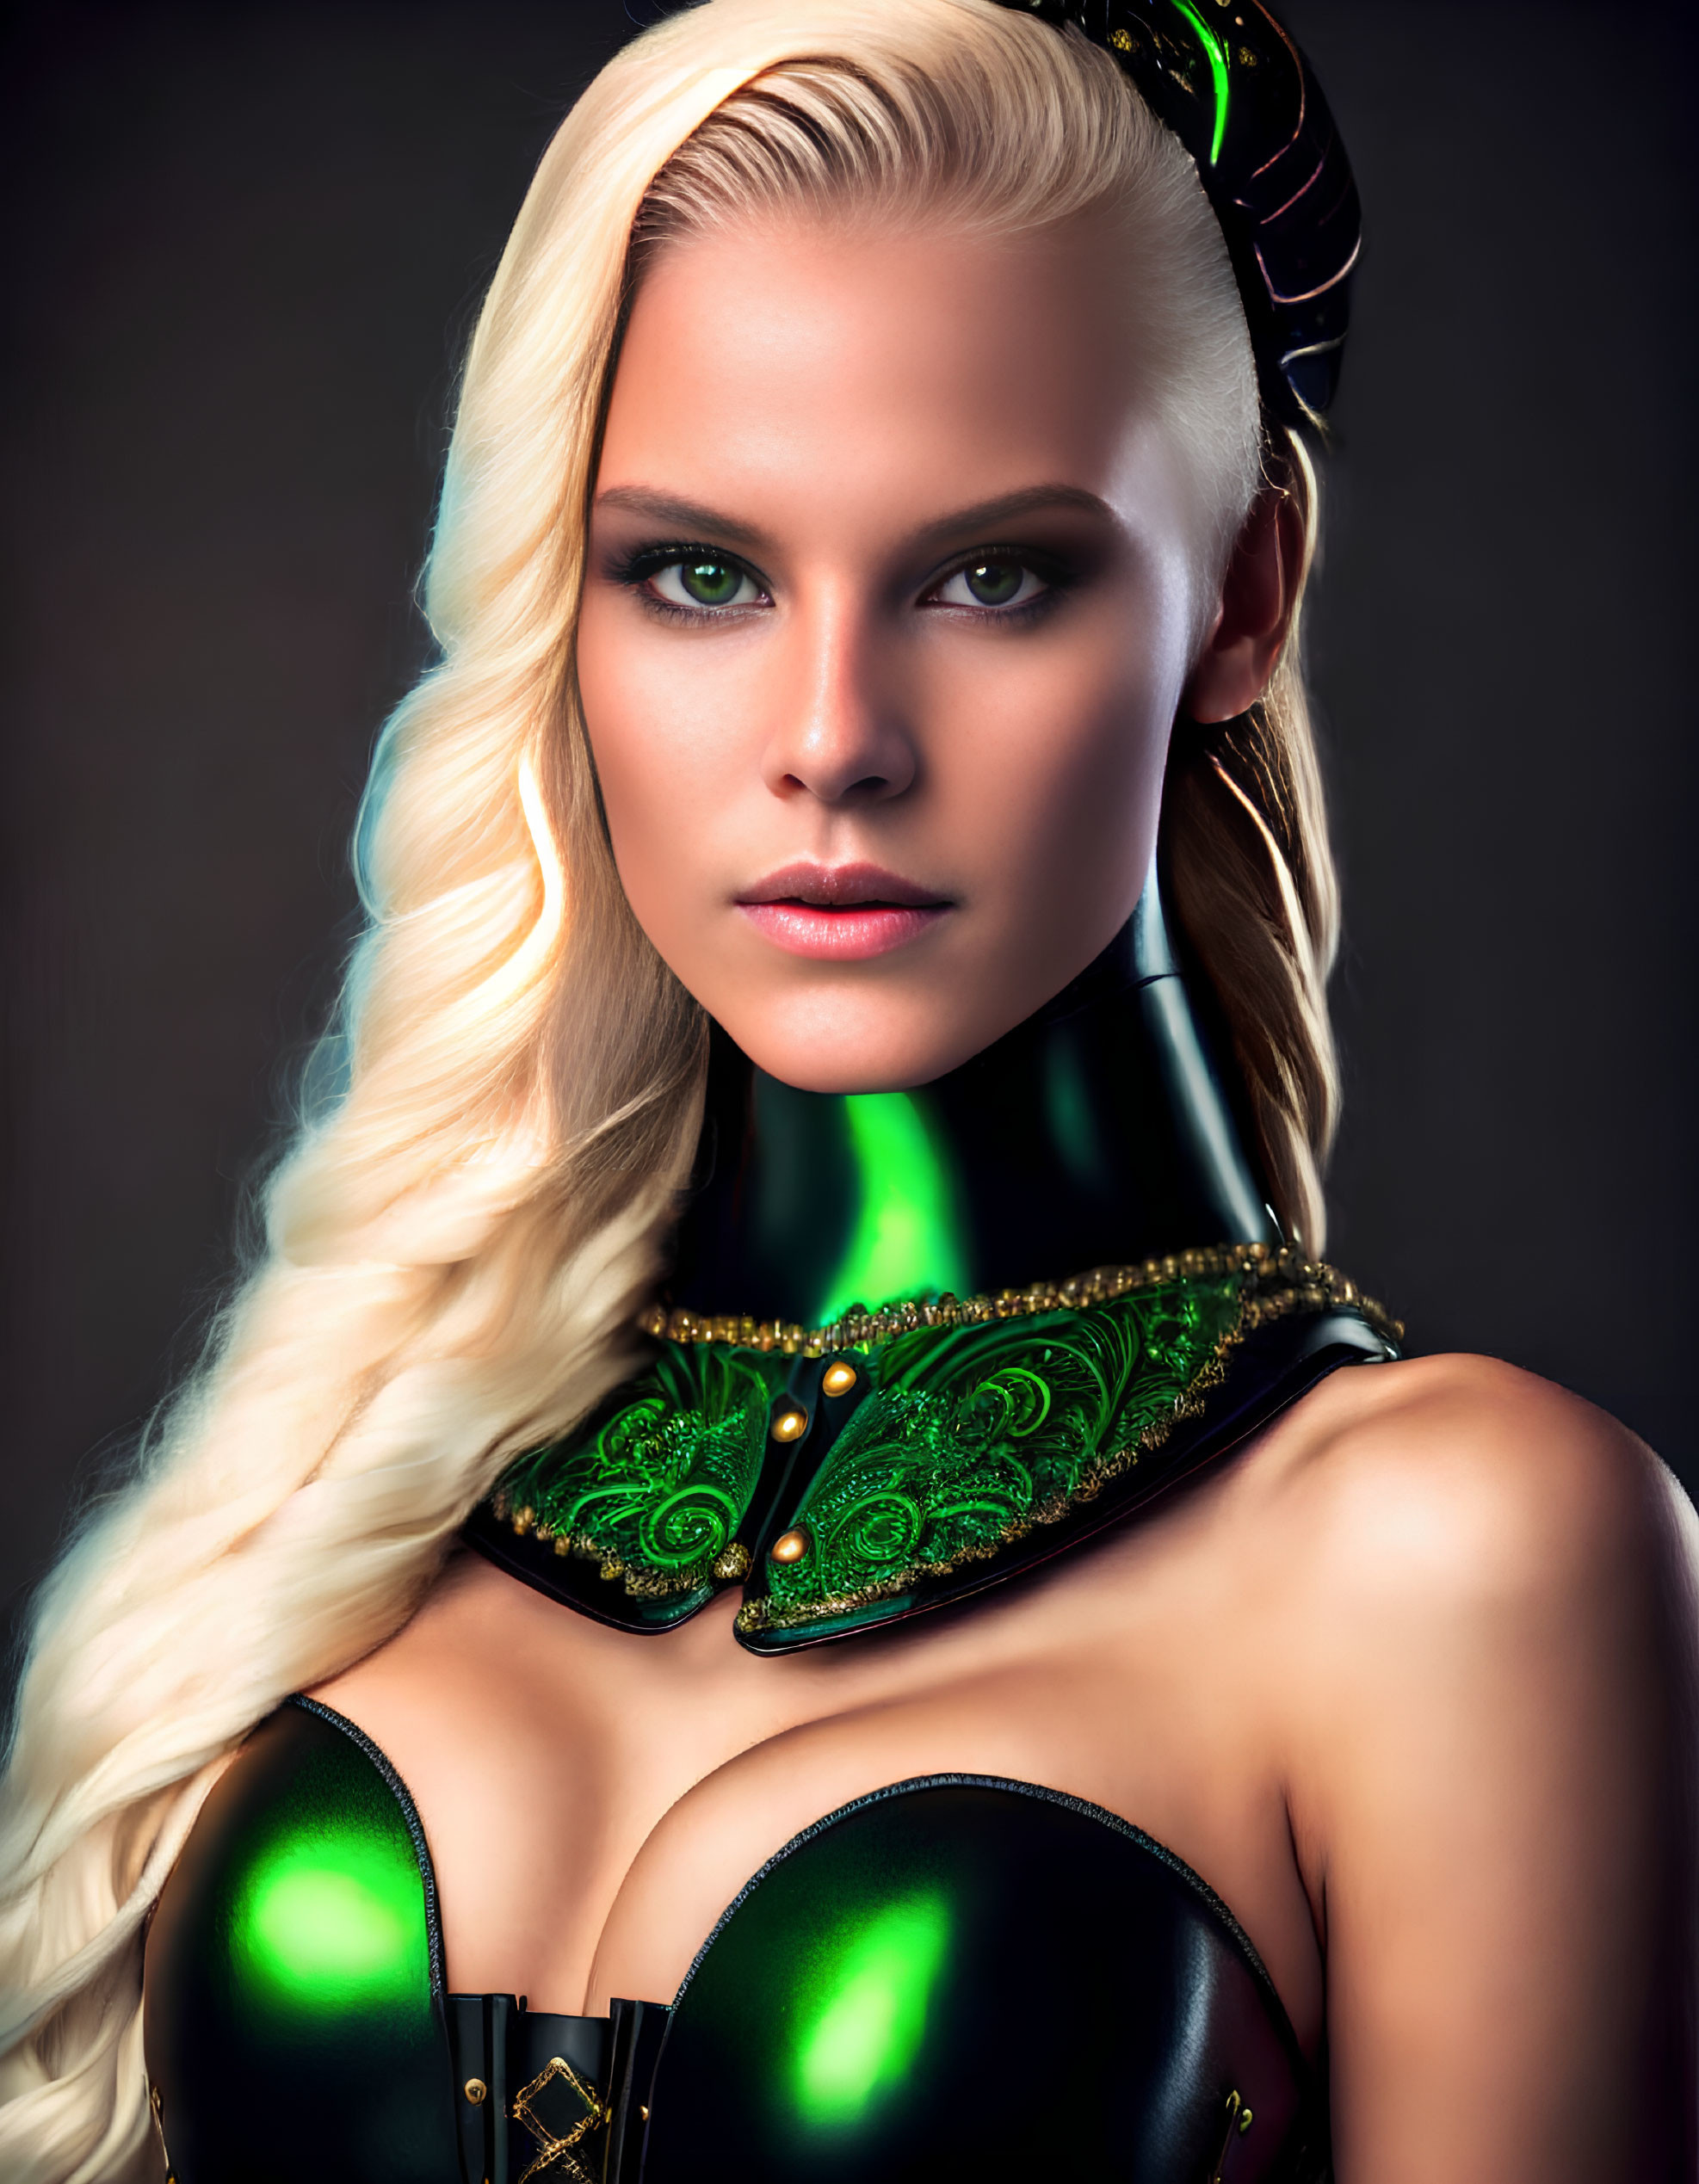 Blonde woman in futuristic black and green corset with ornate collar.